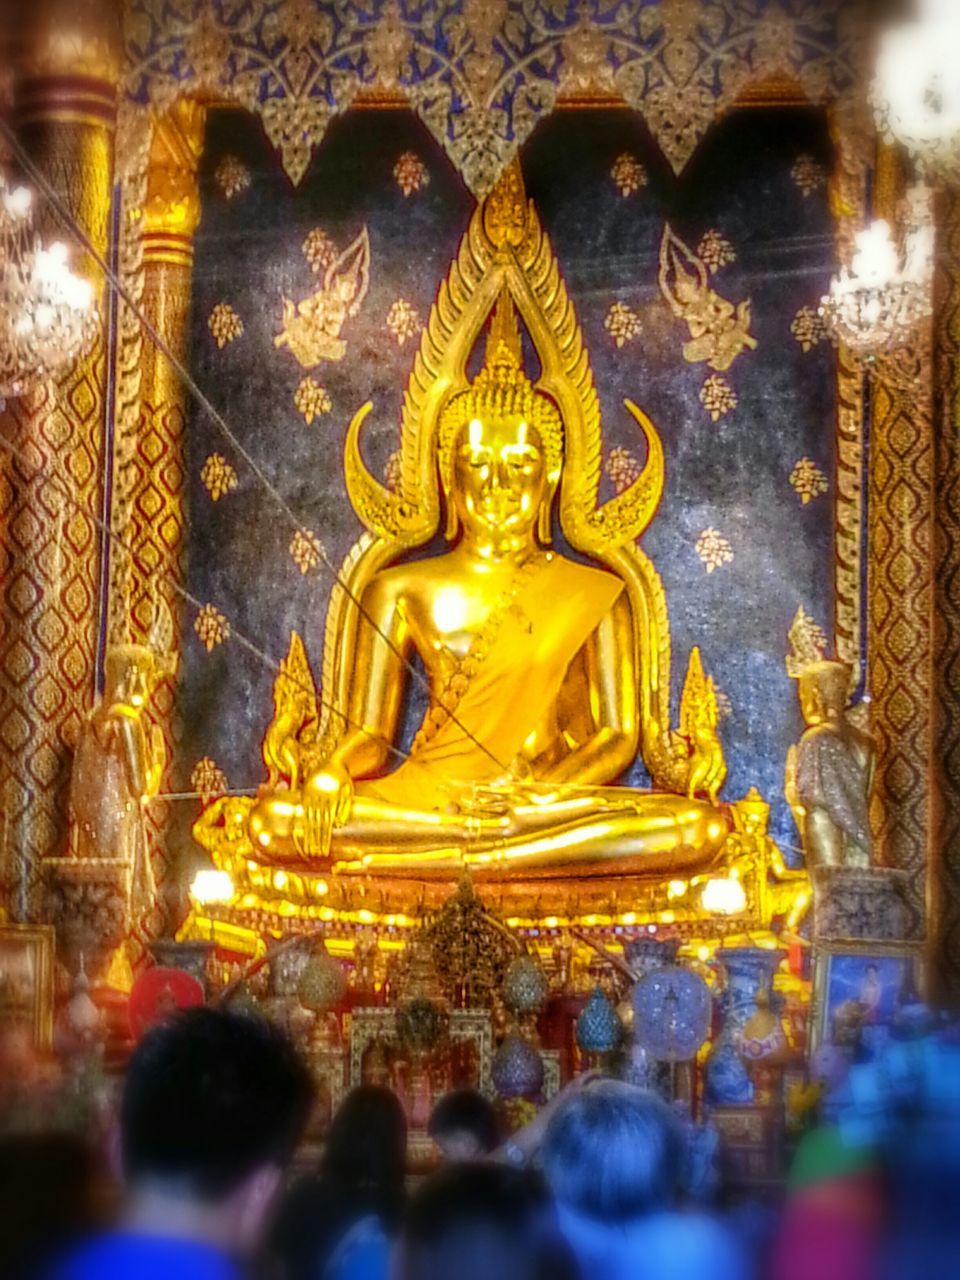 art and craft, statue, art, human representation, sculpture, creativity, religion, place of worship, gold colored, spirituality, indoors, carving - craft product, famous place, ornate, buddha, travel destinations, architecture